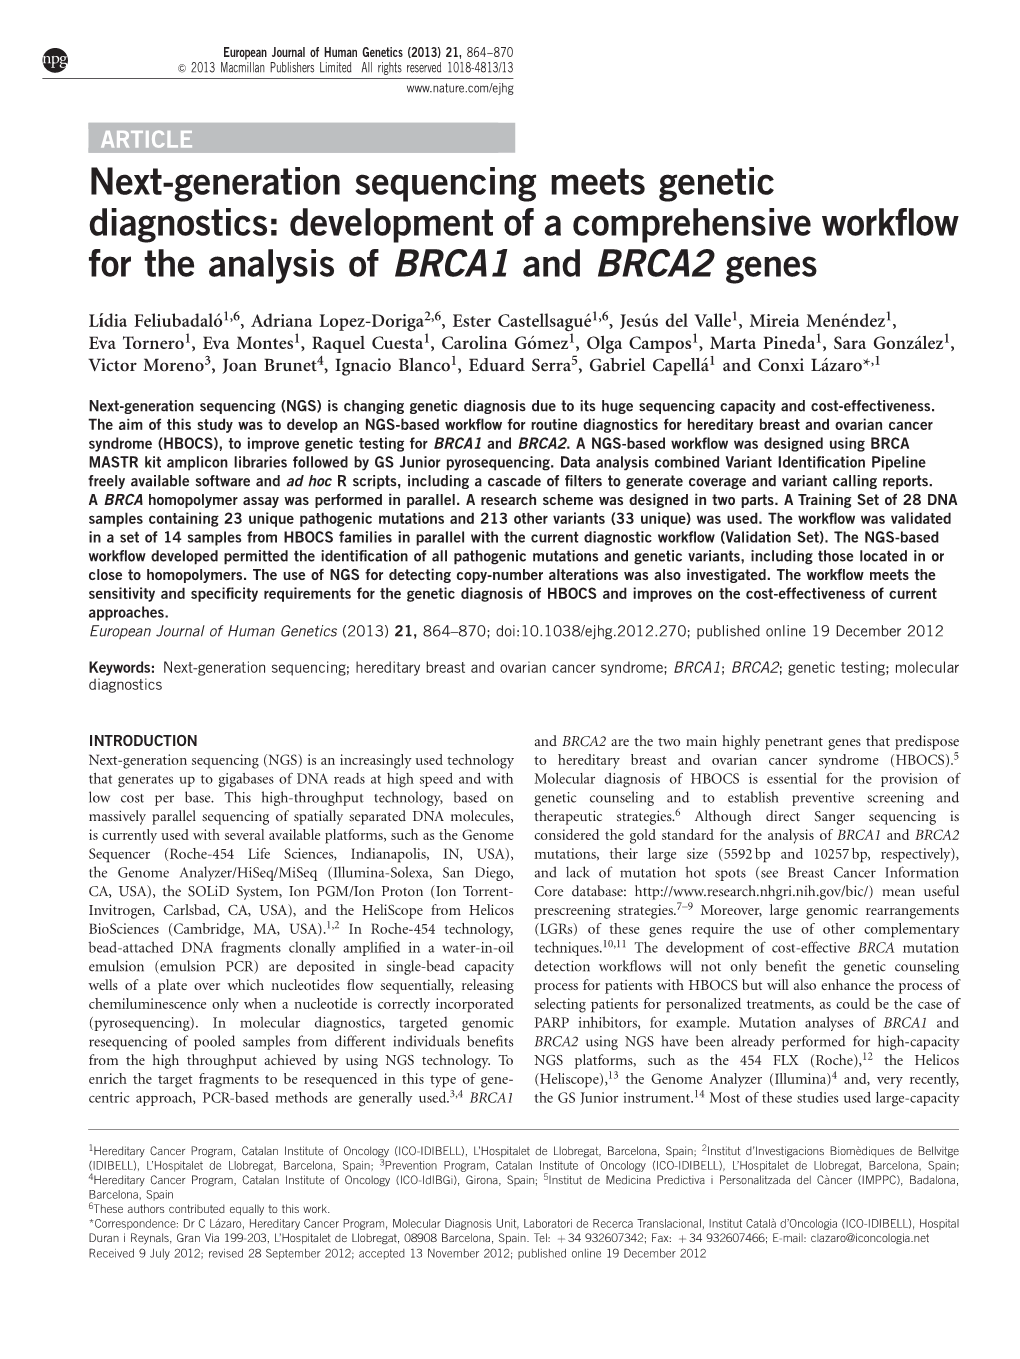 Next-Generation Sequencing Meets Genetic Diagnostics: Development of a Comprehensive Workﬂow for the Analysis of BRCA1 and BRCA2 Genes